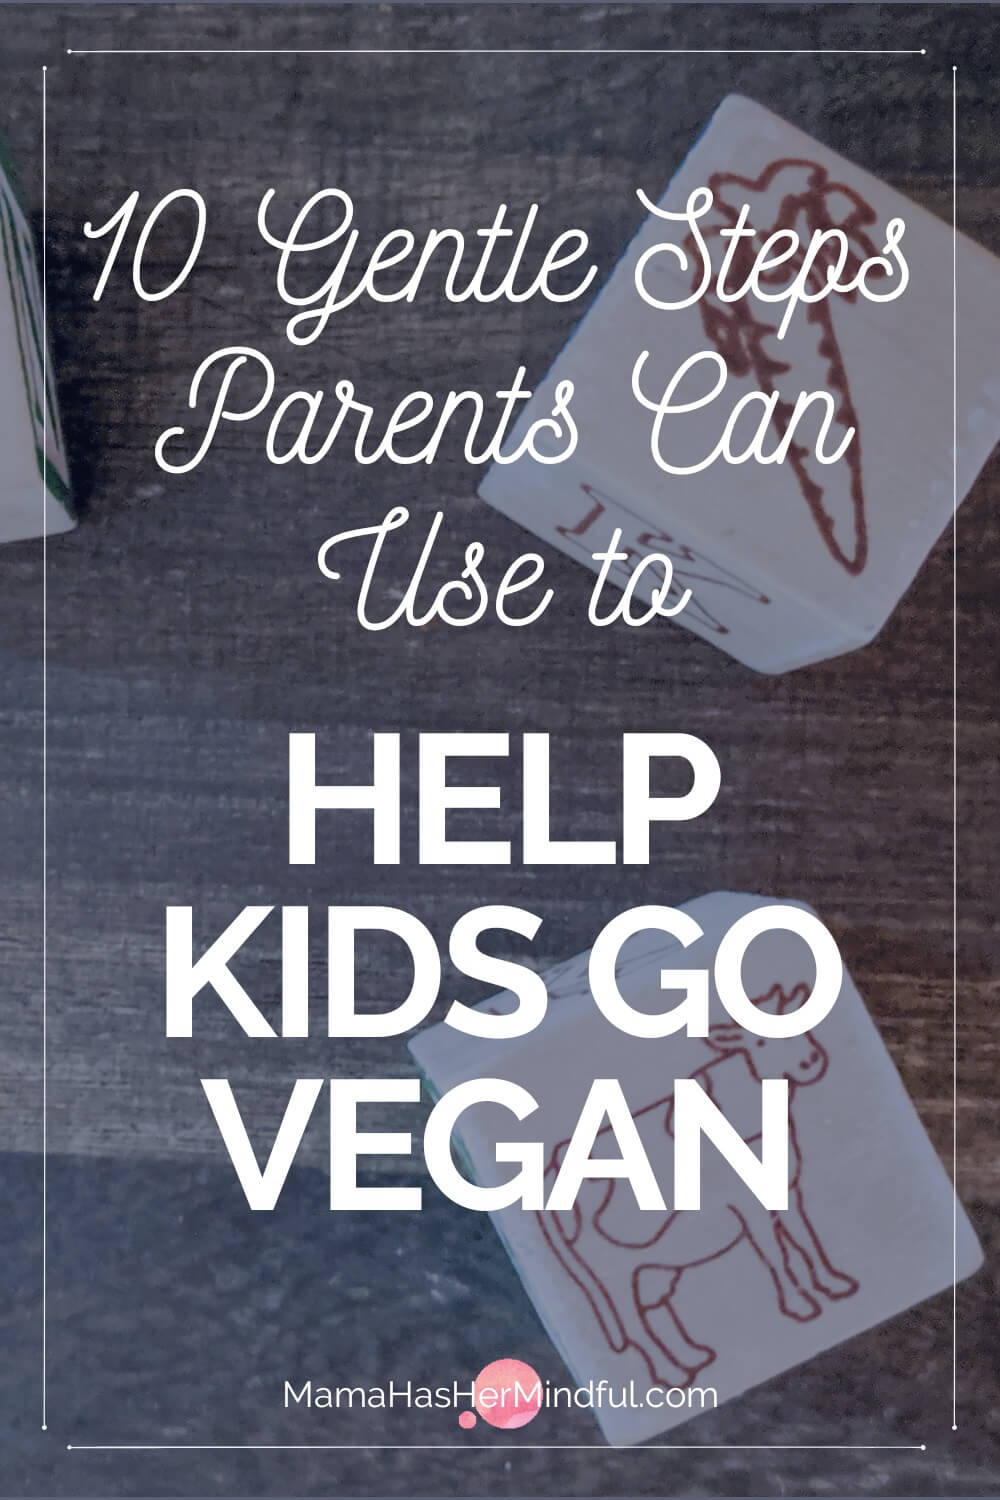 10 Supportive Steps to Help Parents Gently Transition Kids to a Vegan Diet